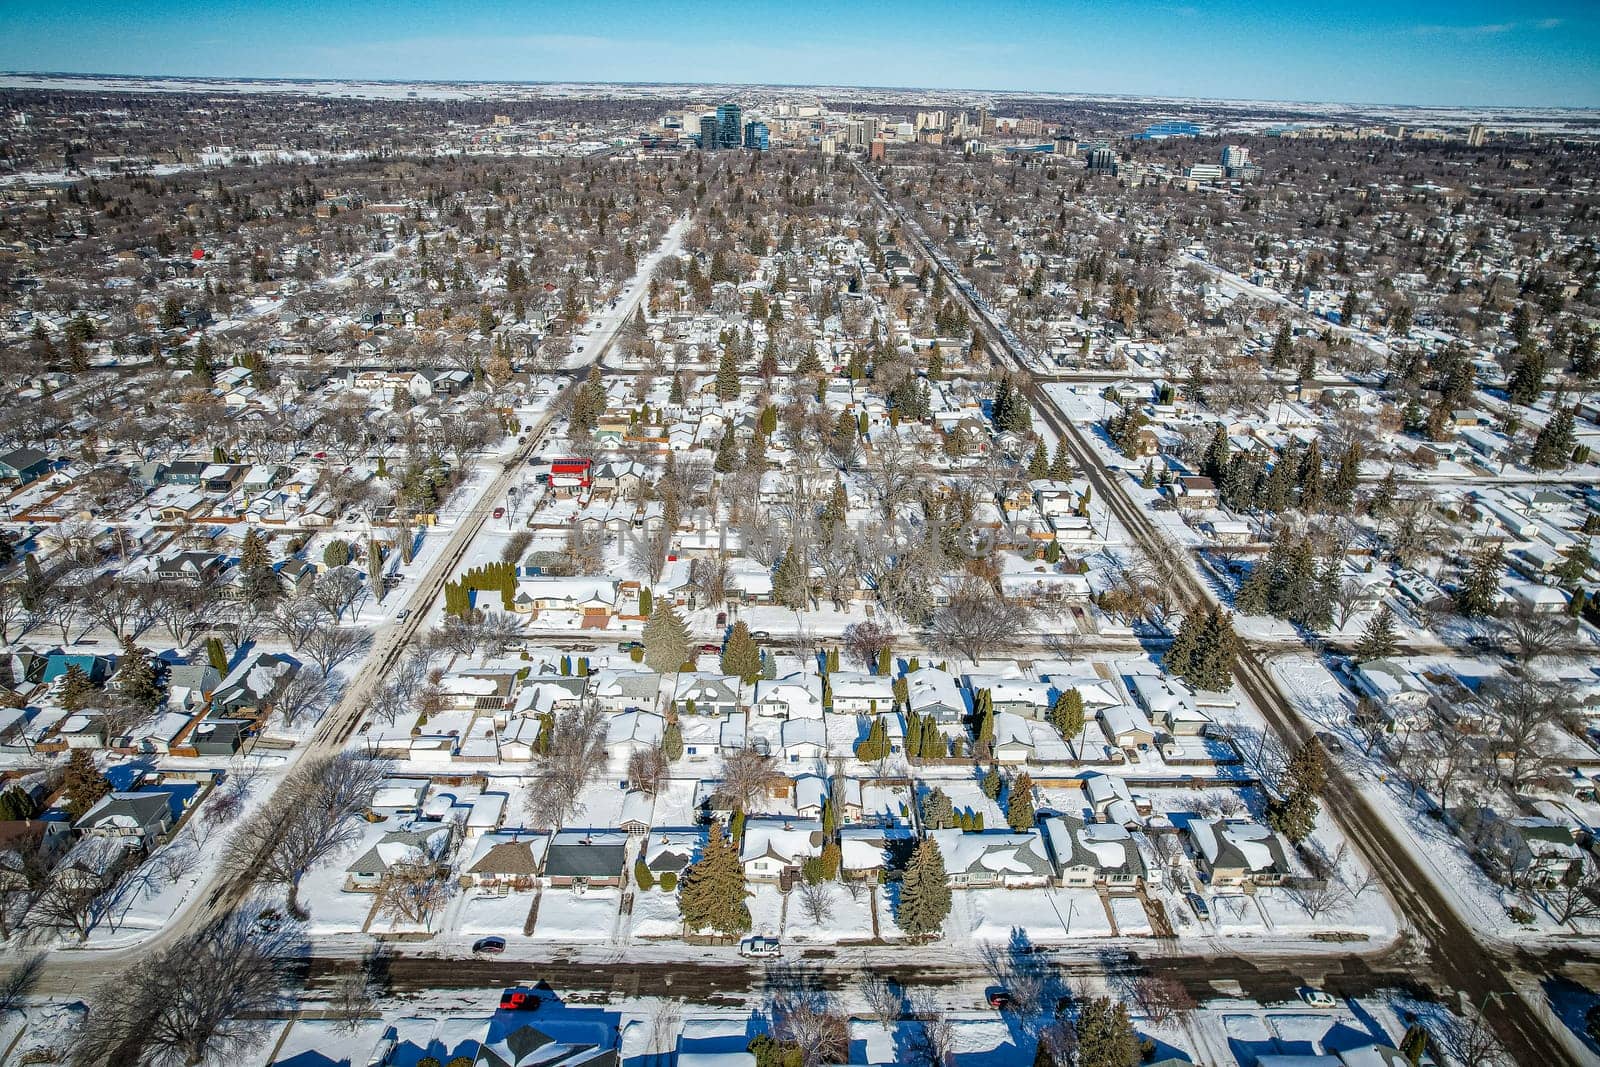 Drone image showcasing the charm of Queen Elizabeth, Saskatoon, with its residential areas, greenery, and community spaces